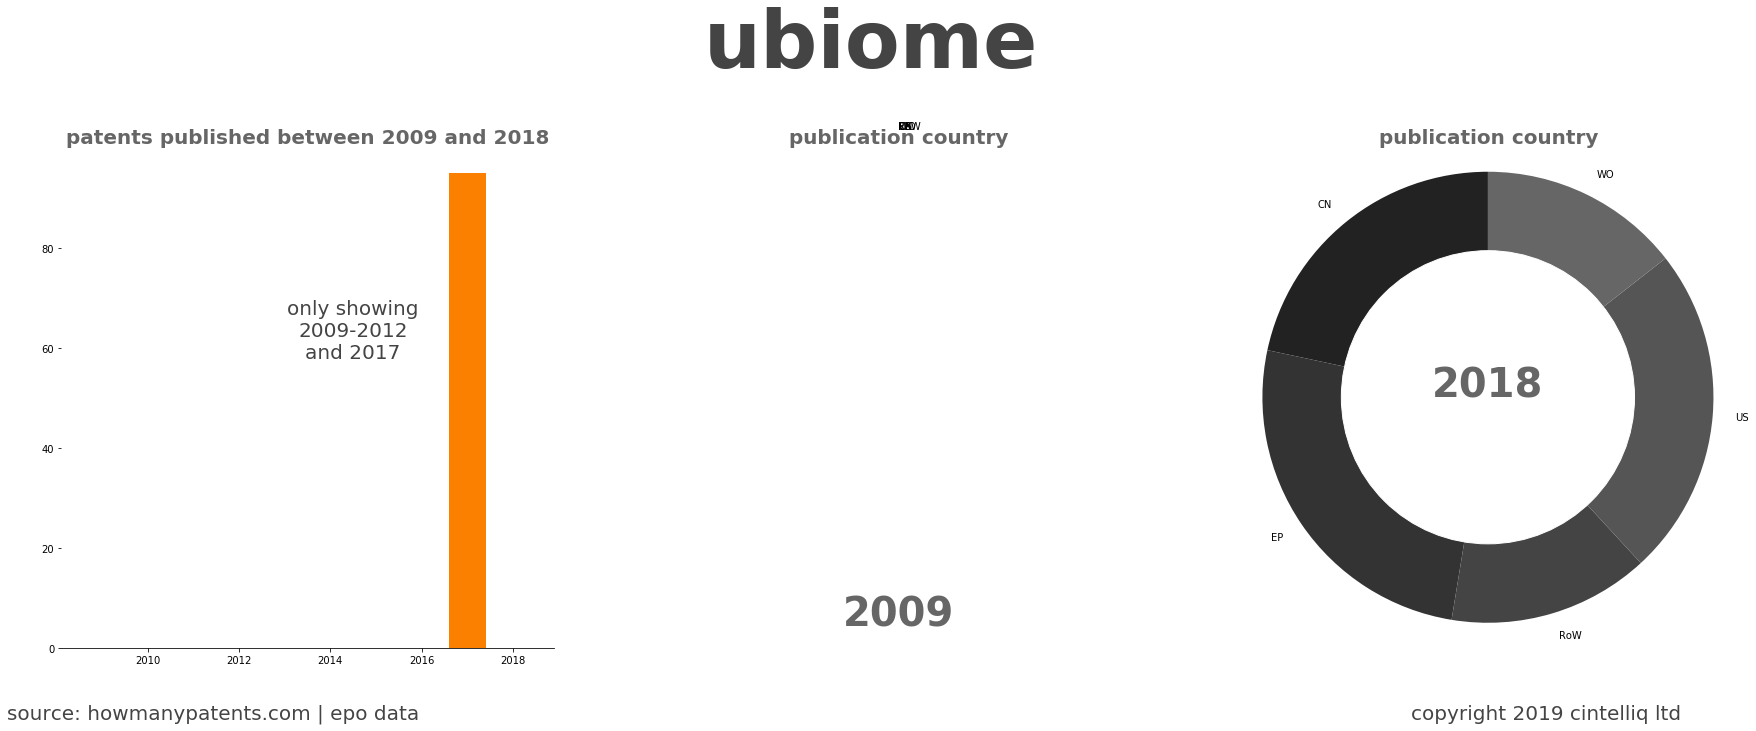 summary of patents for Ubiome